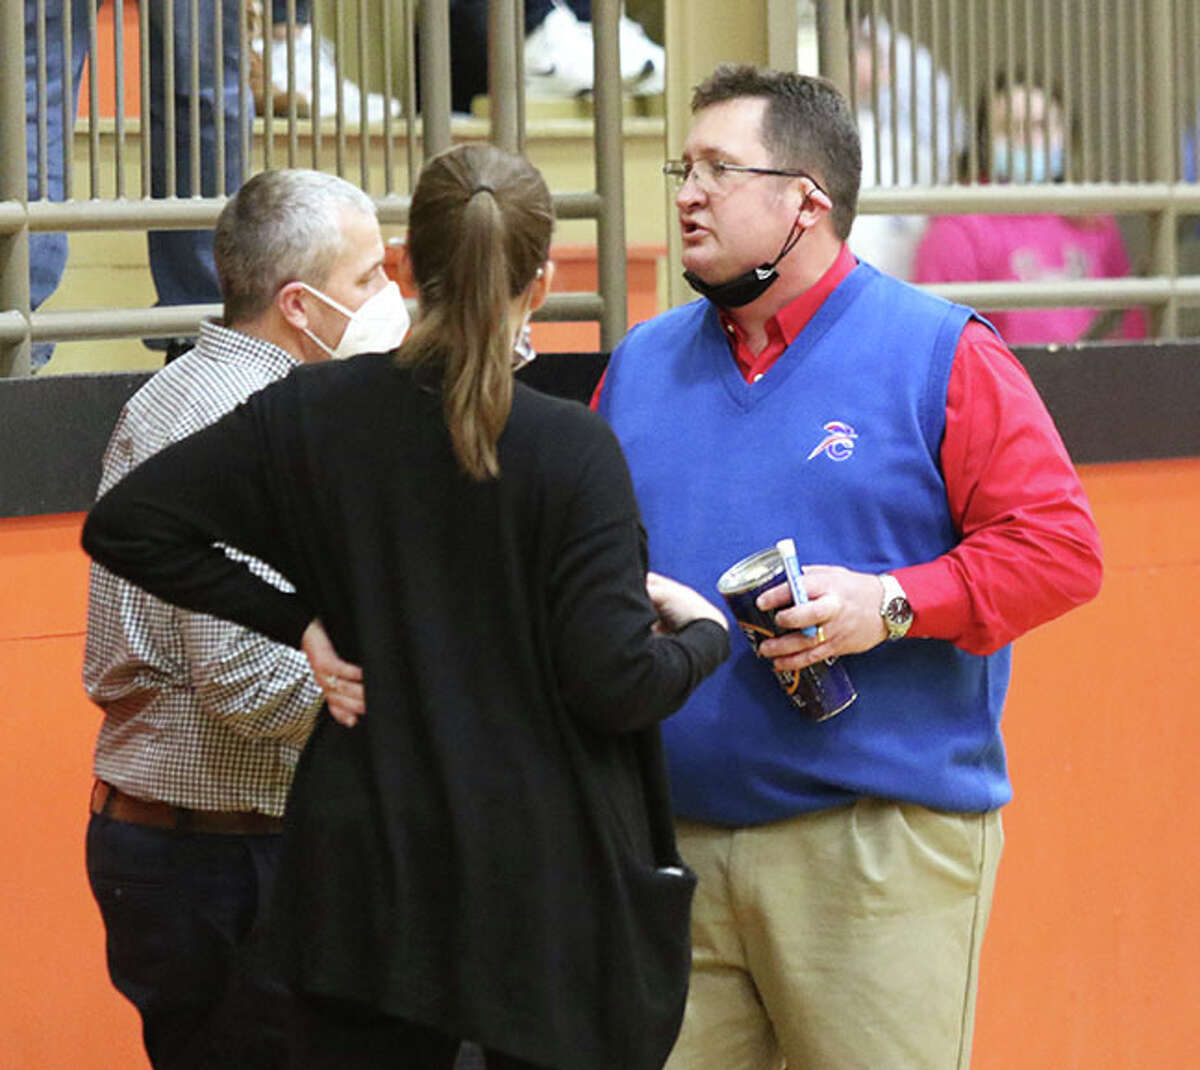 Carlinville coach Darrin DeNeve (right) talks with assistants John Reels (left) and Renee Rehkemper at halftime of the title game at the Macoupin County Tourney earlier this season in Gillespie. The Cavaliers rallied in the fourth quarter Tuesday night to beat South County in the Hillsboro Class 2A Regional.